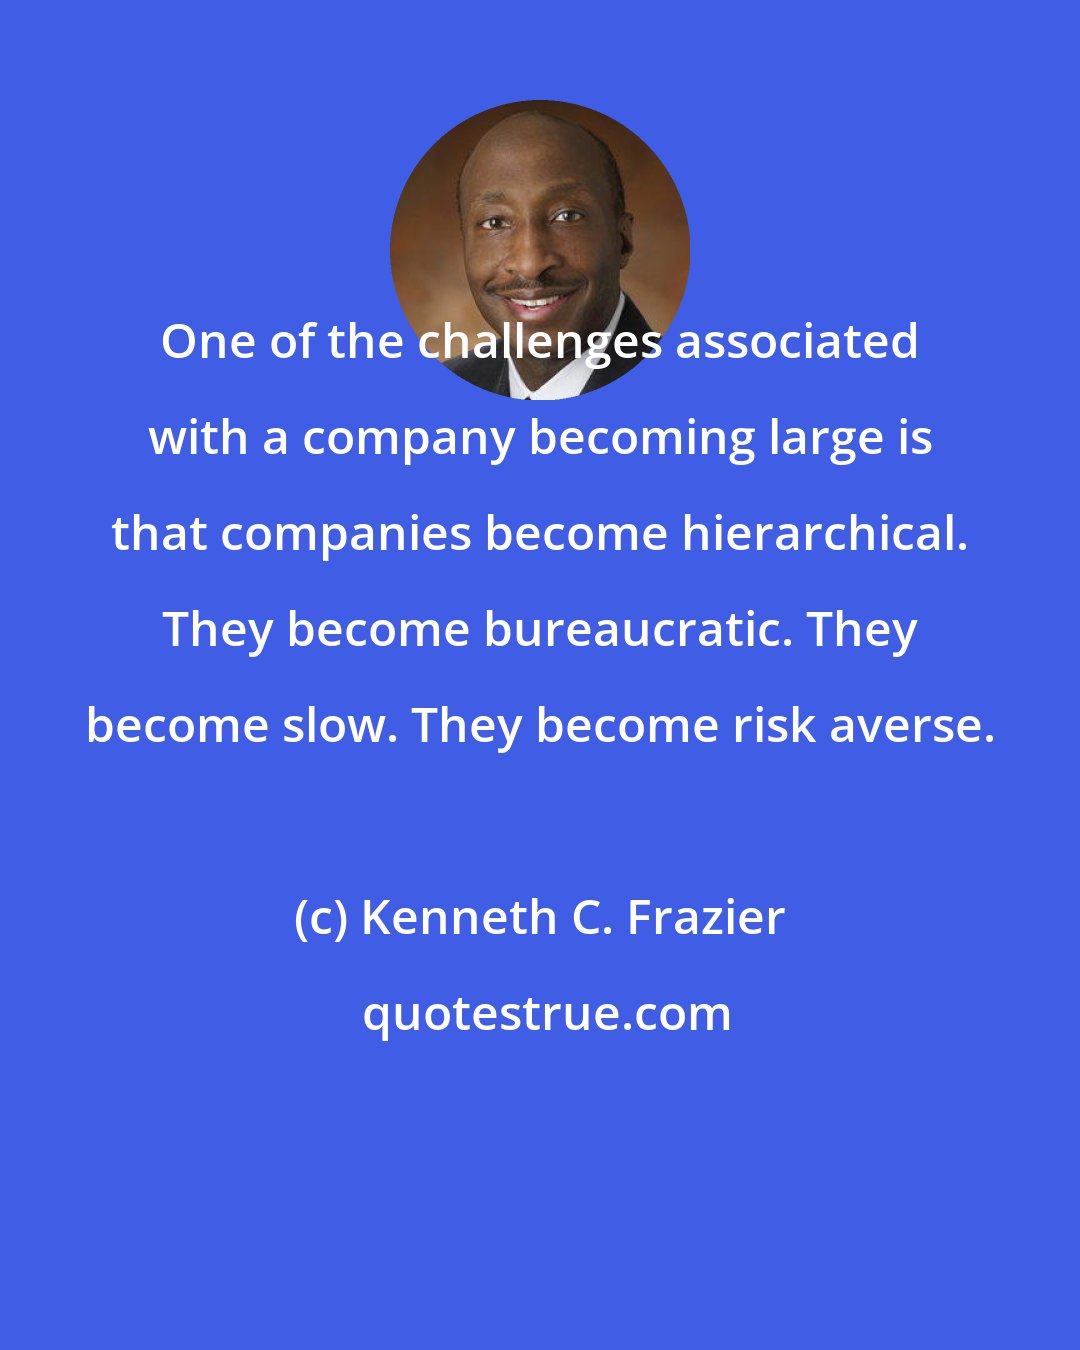 Kenneth C. Frazier: One of the challenges associated with a company becoming large is that companies become hierarchical. They become bureaucratic. They become slow. They become risk averse.